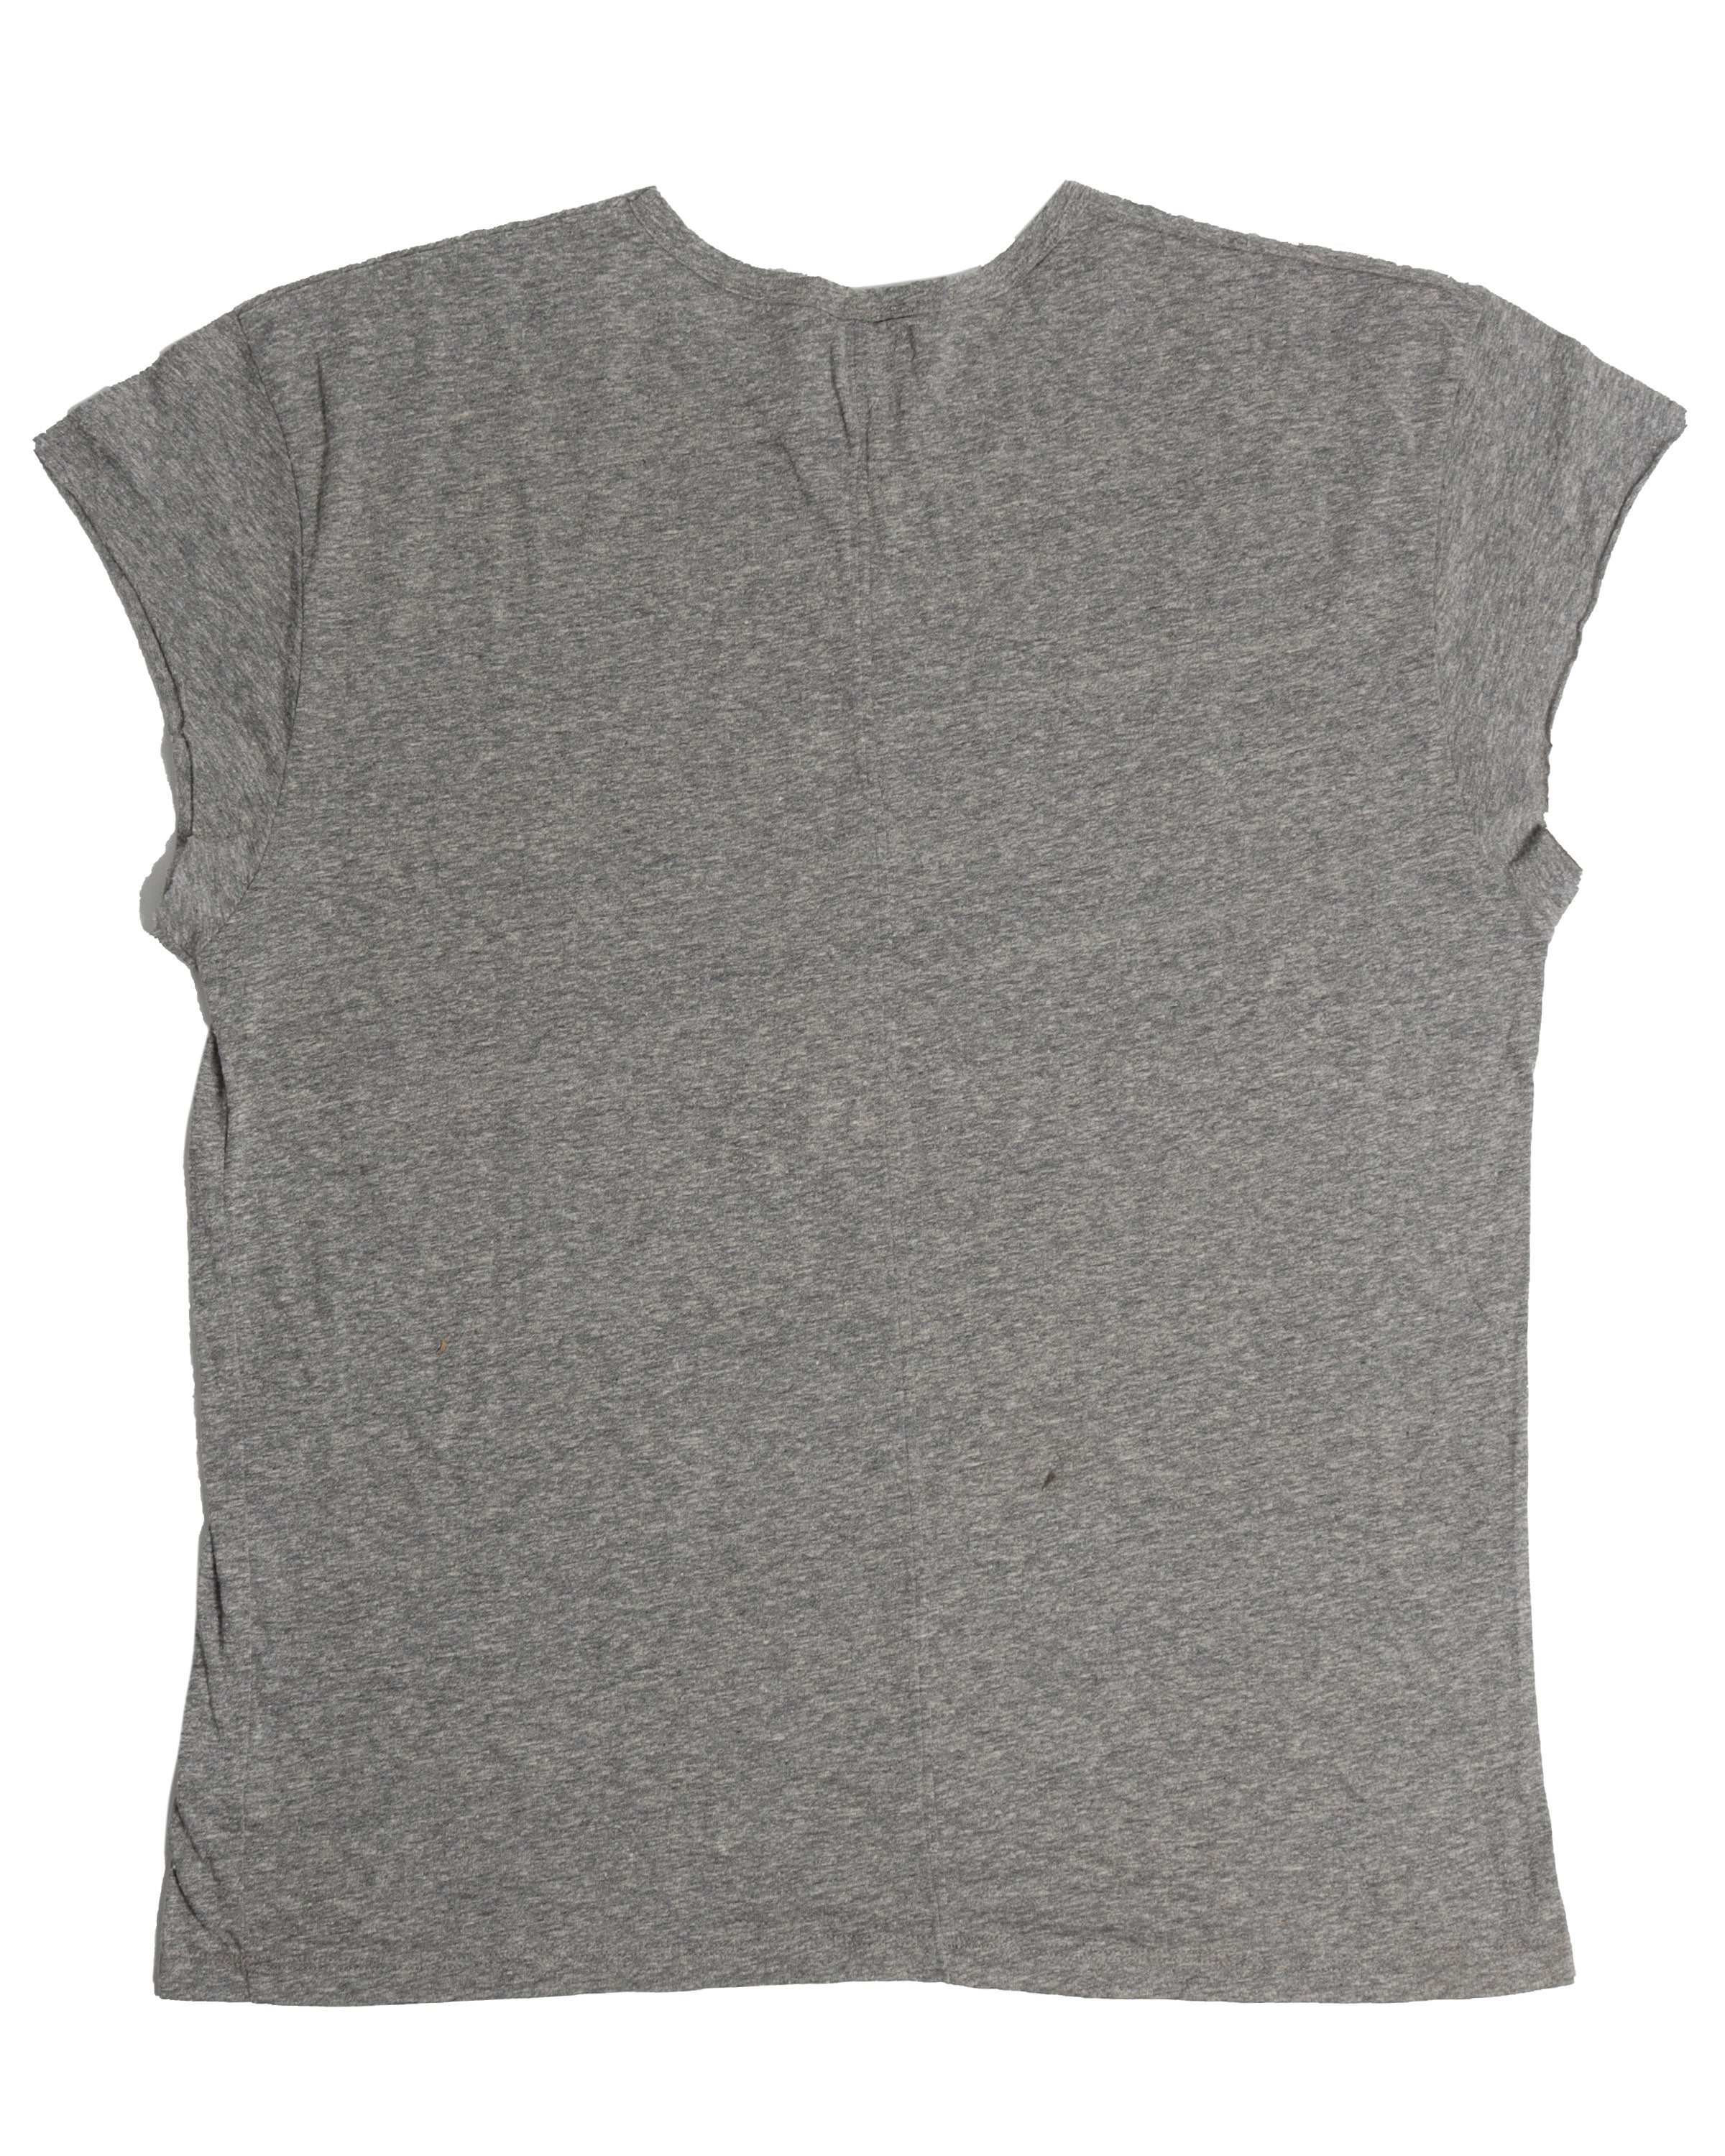 2nd Collection Grey Shirt